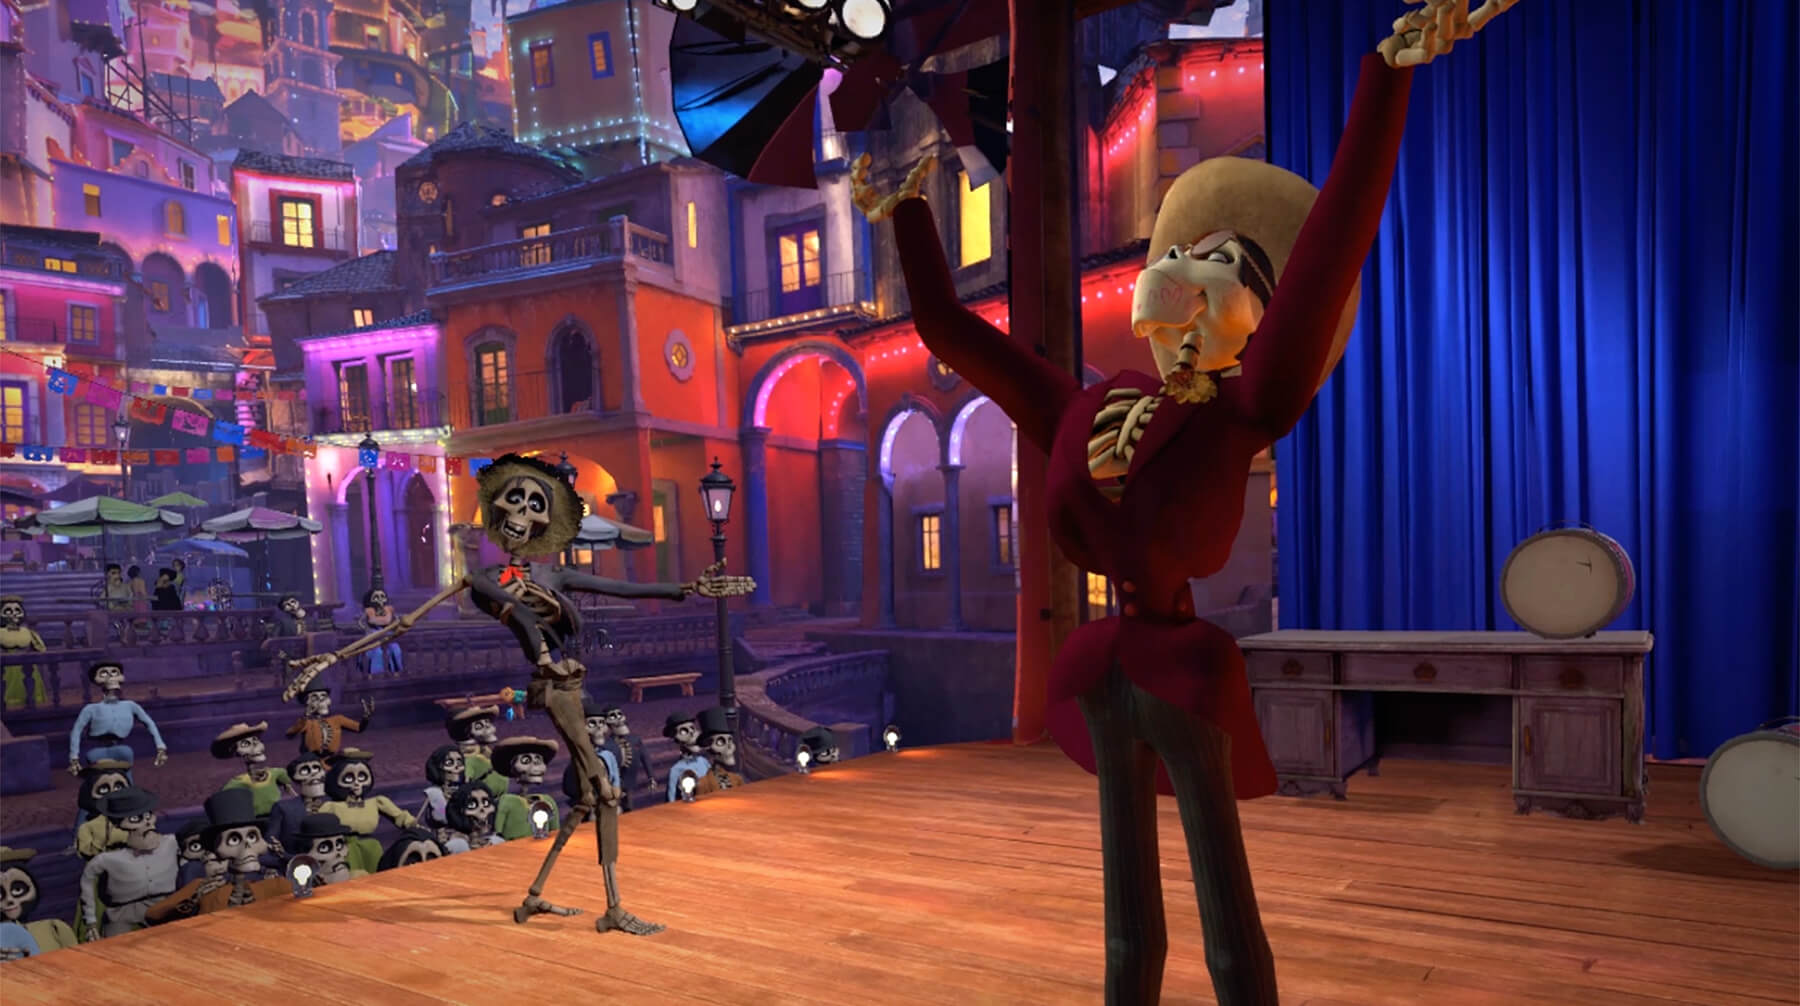 Coco character Hector stands alongside another skeleton on a stage in Coco VR's Land of the Dead.